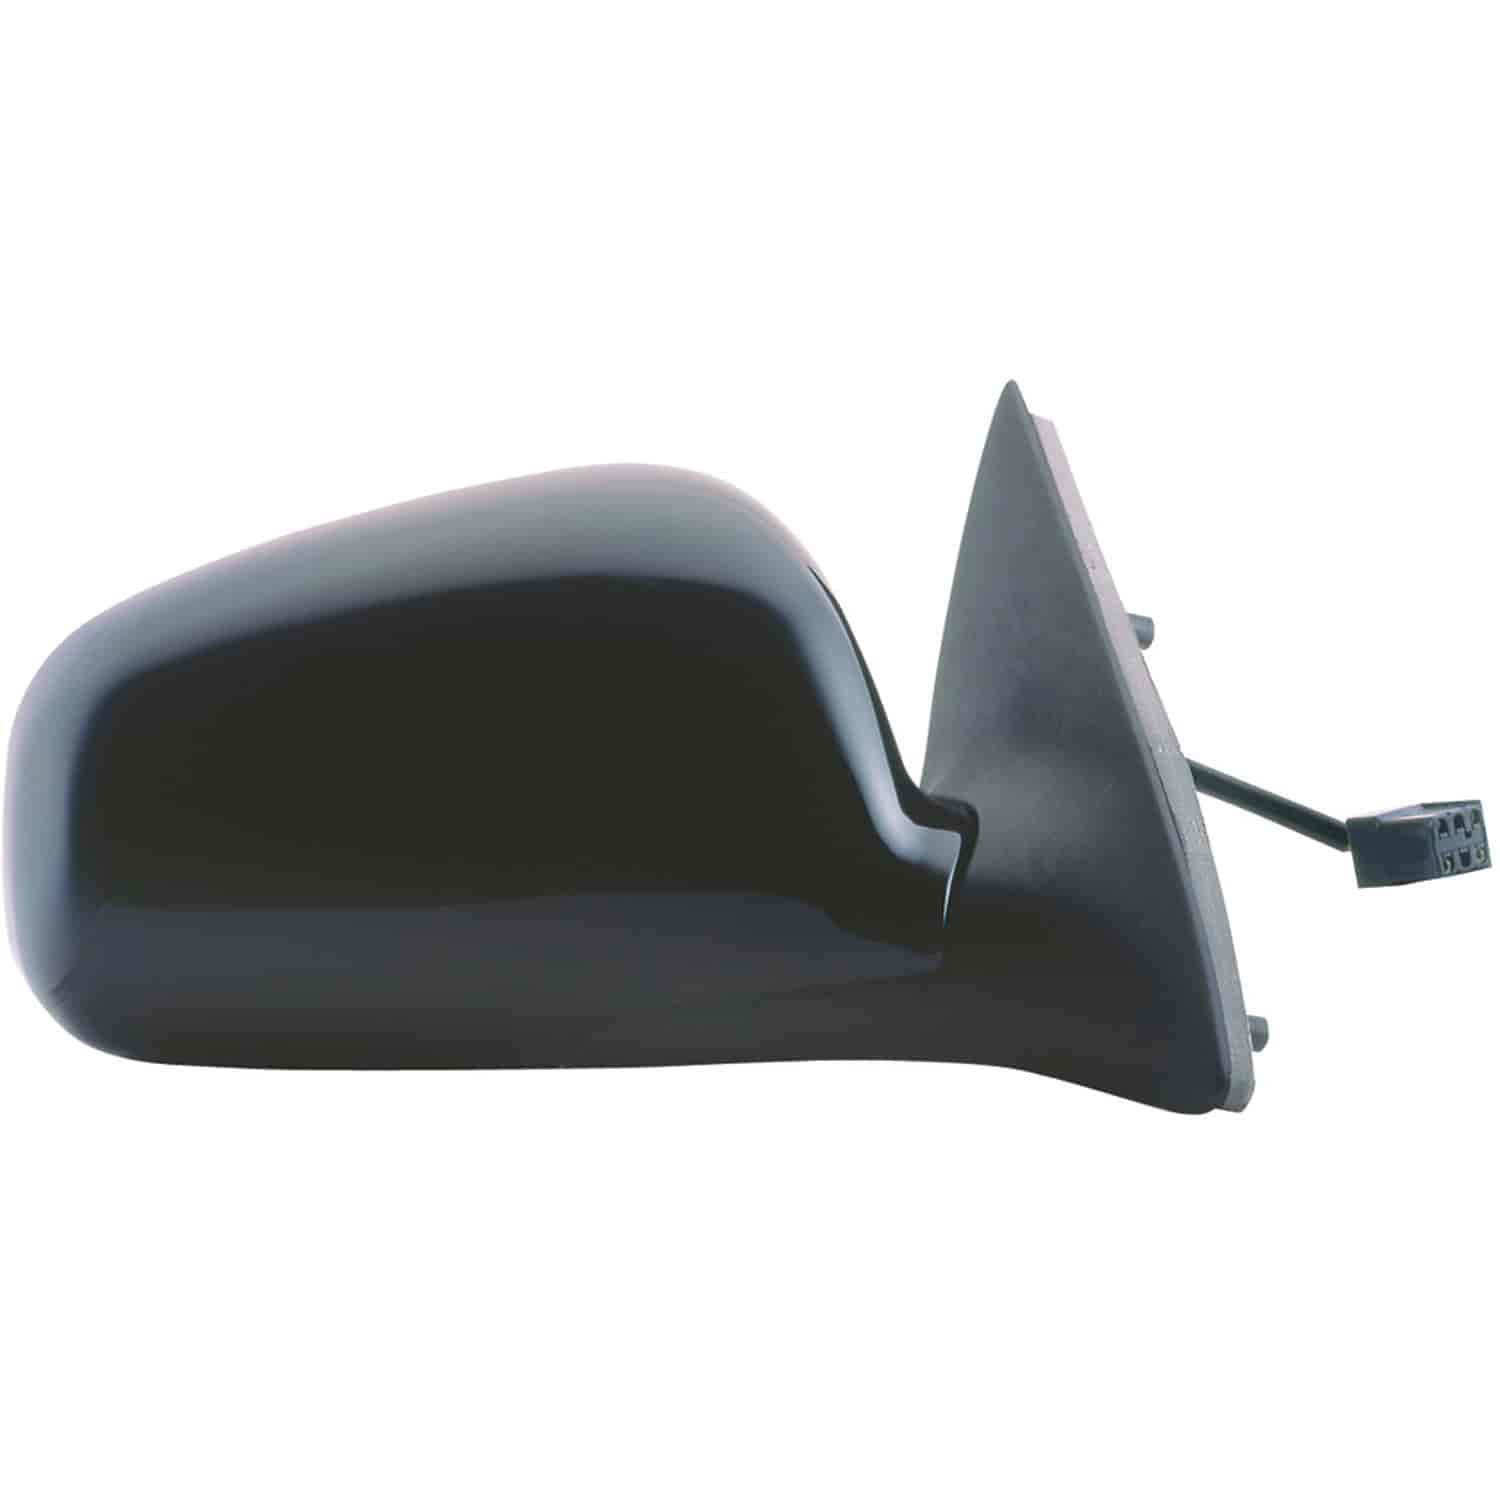 OEM Style Replacement mirror for 98-02 Lincoln Town Car passenger side mirror tested to fit and func